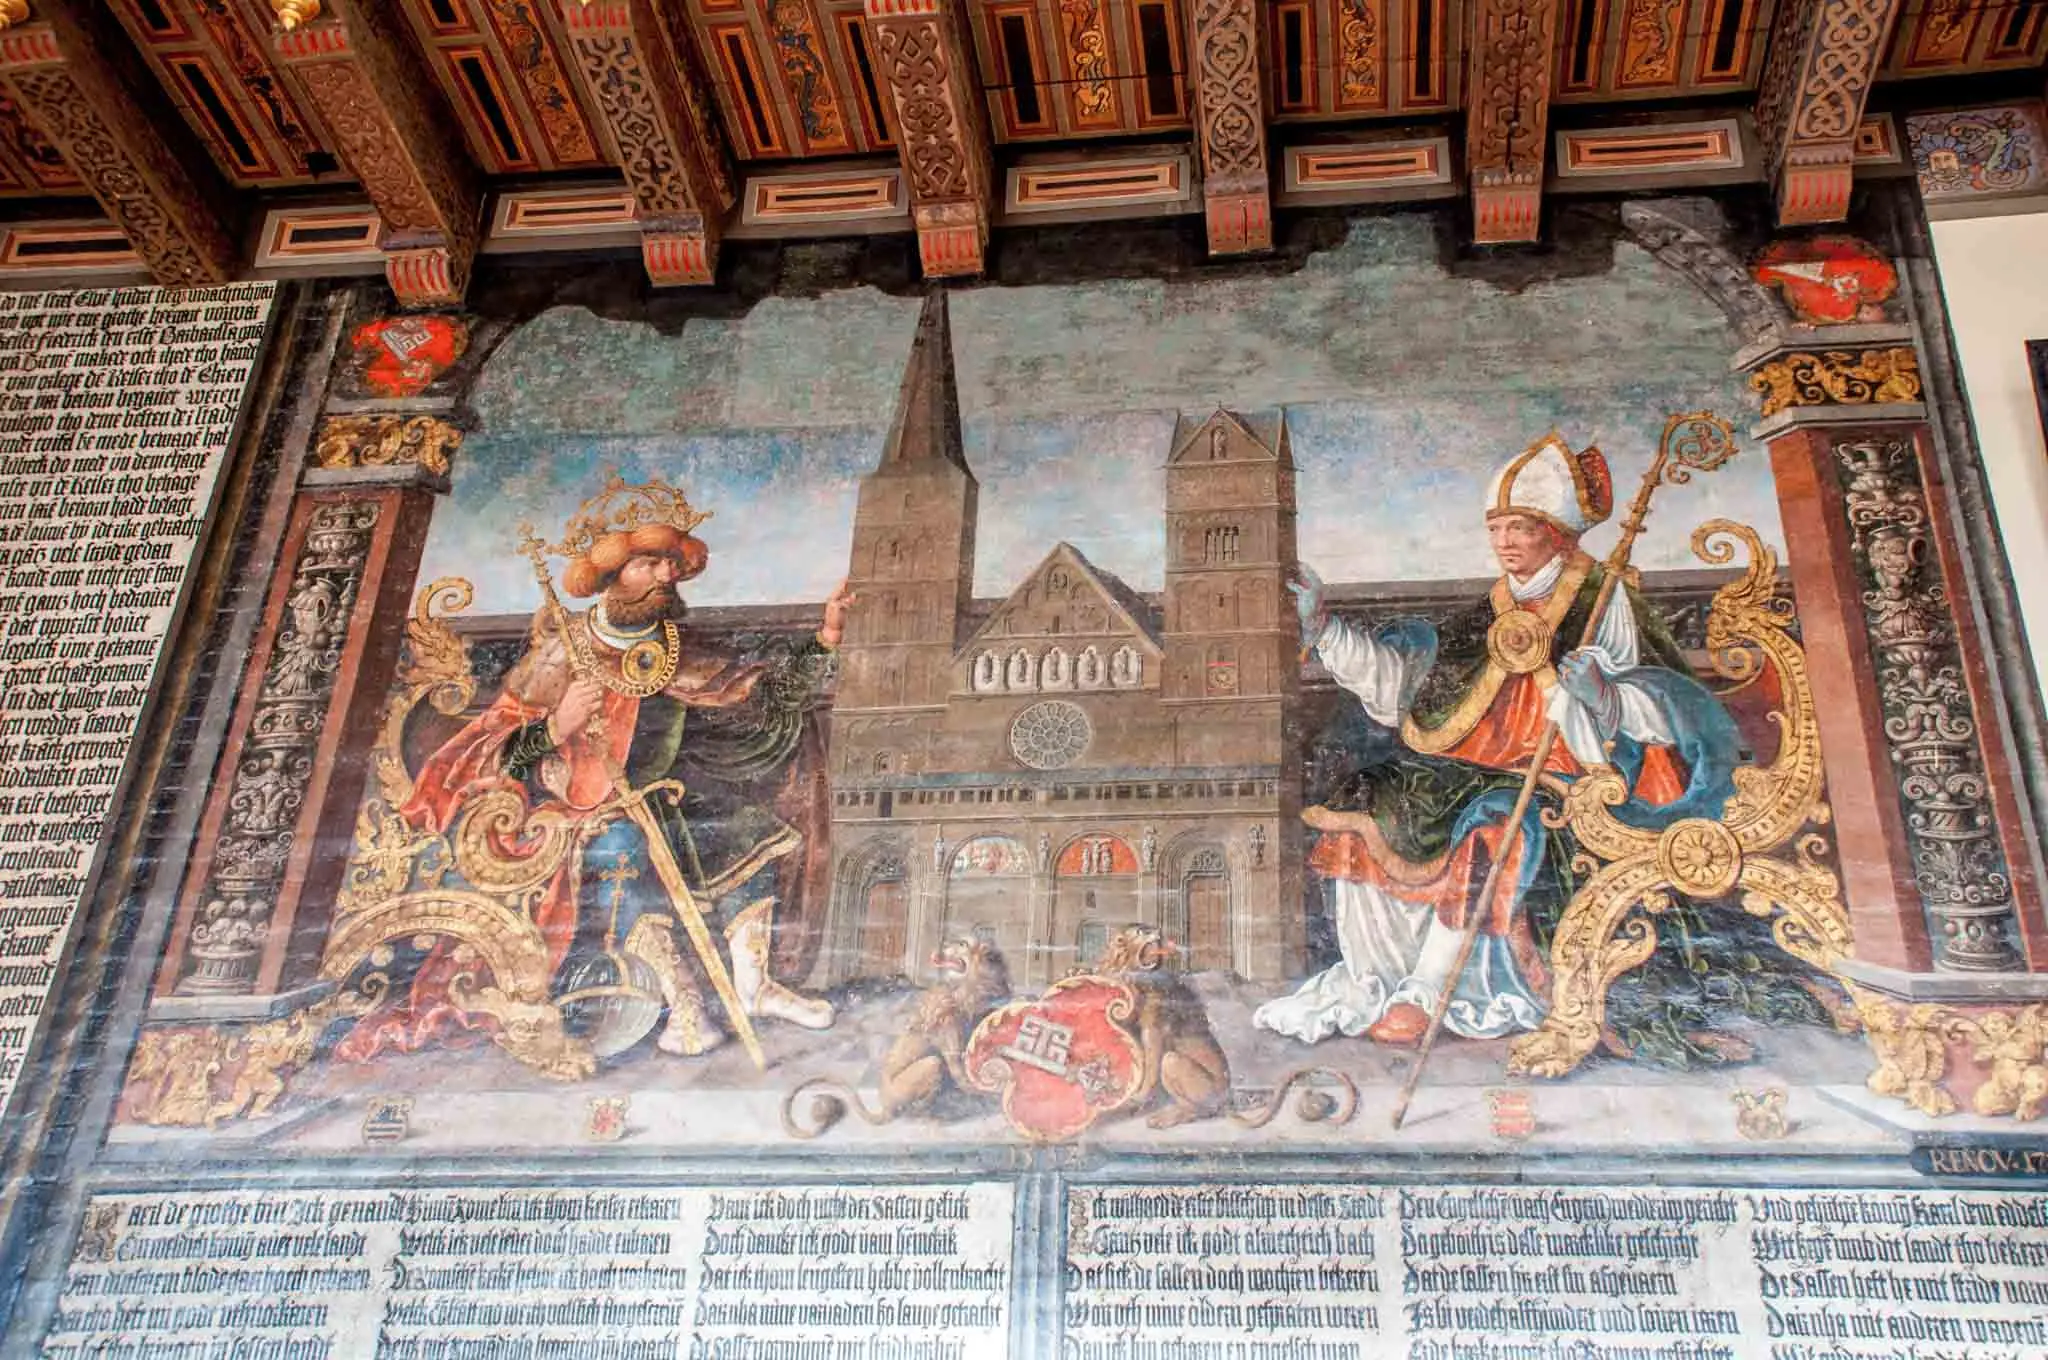 Painting of Charlemagne giving the first church to the city